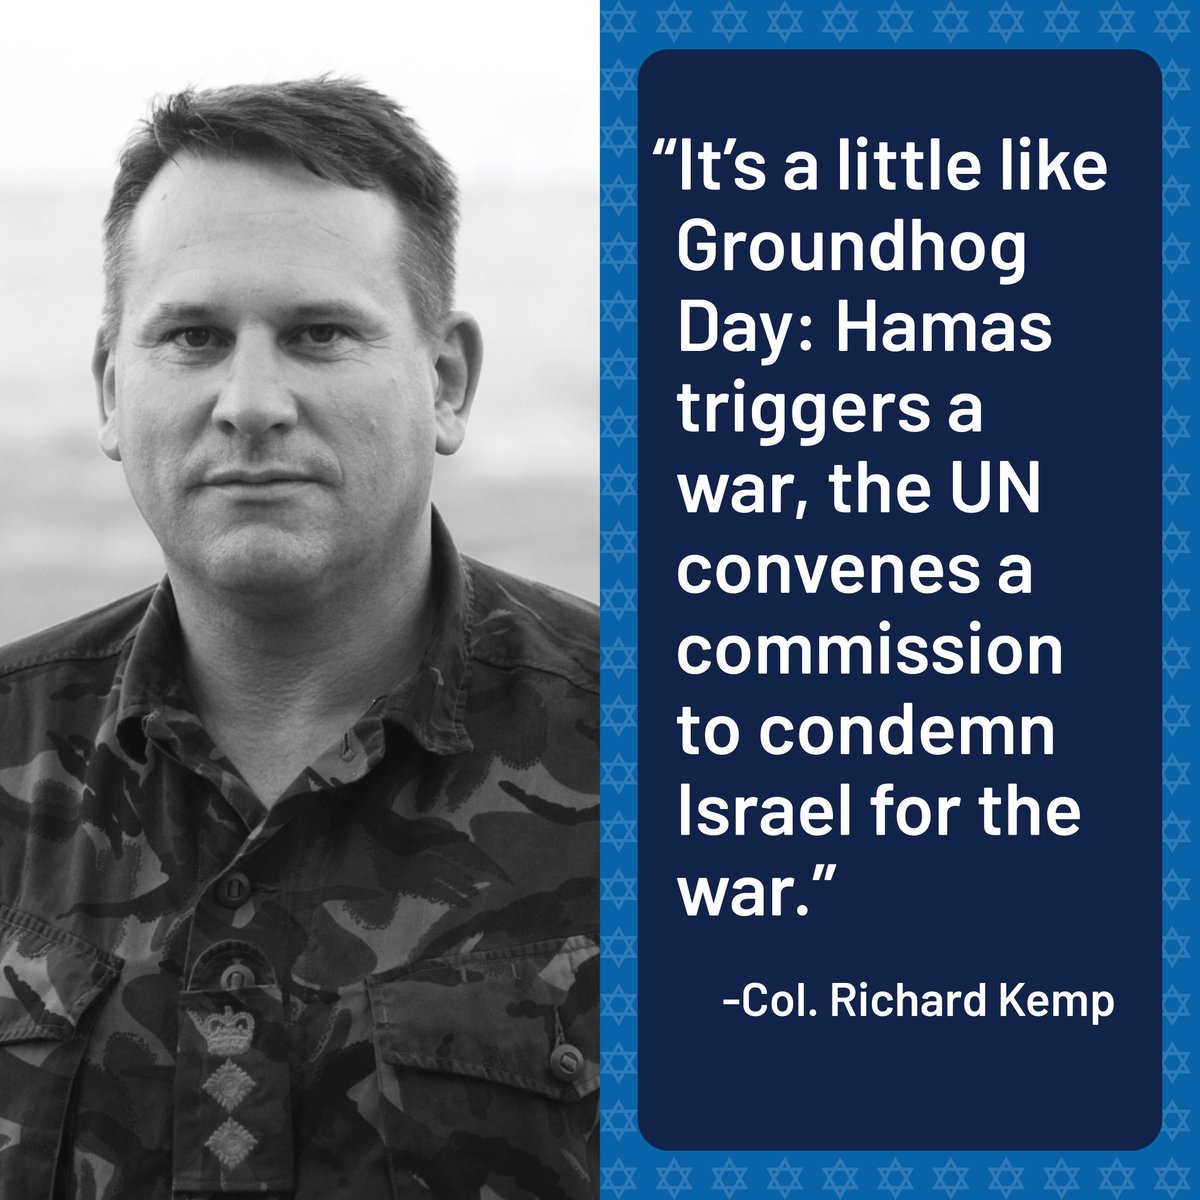 “It's a little like Groundhog Day: Hamas triggers a war, the UN convenes a commission to condemn Israel for the war.” -@ColRichardKemp calls it like it is.
#FixedInquiry #SupportIsrael #UnitedNations #PillayIsBiased #OperationGuardianoftheWalls #Israel